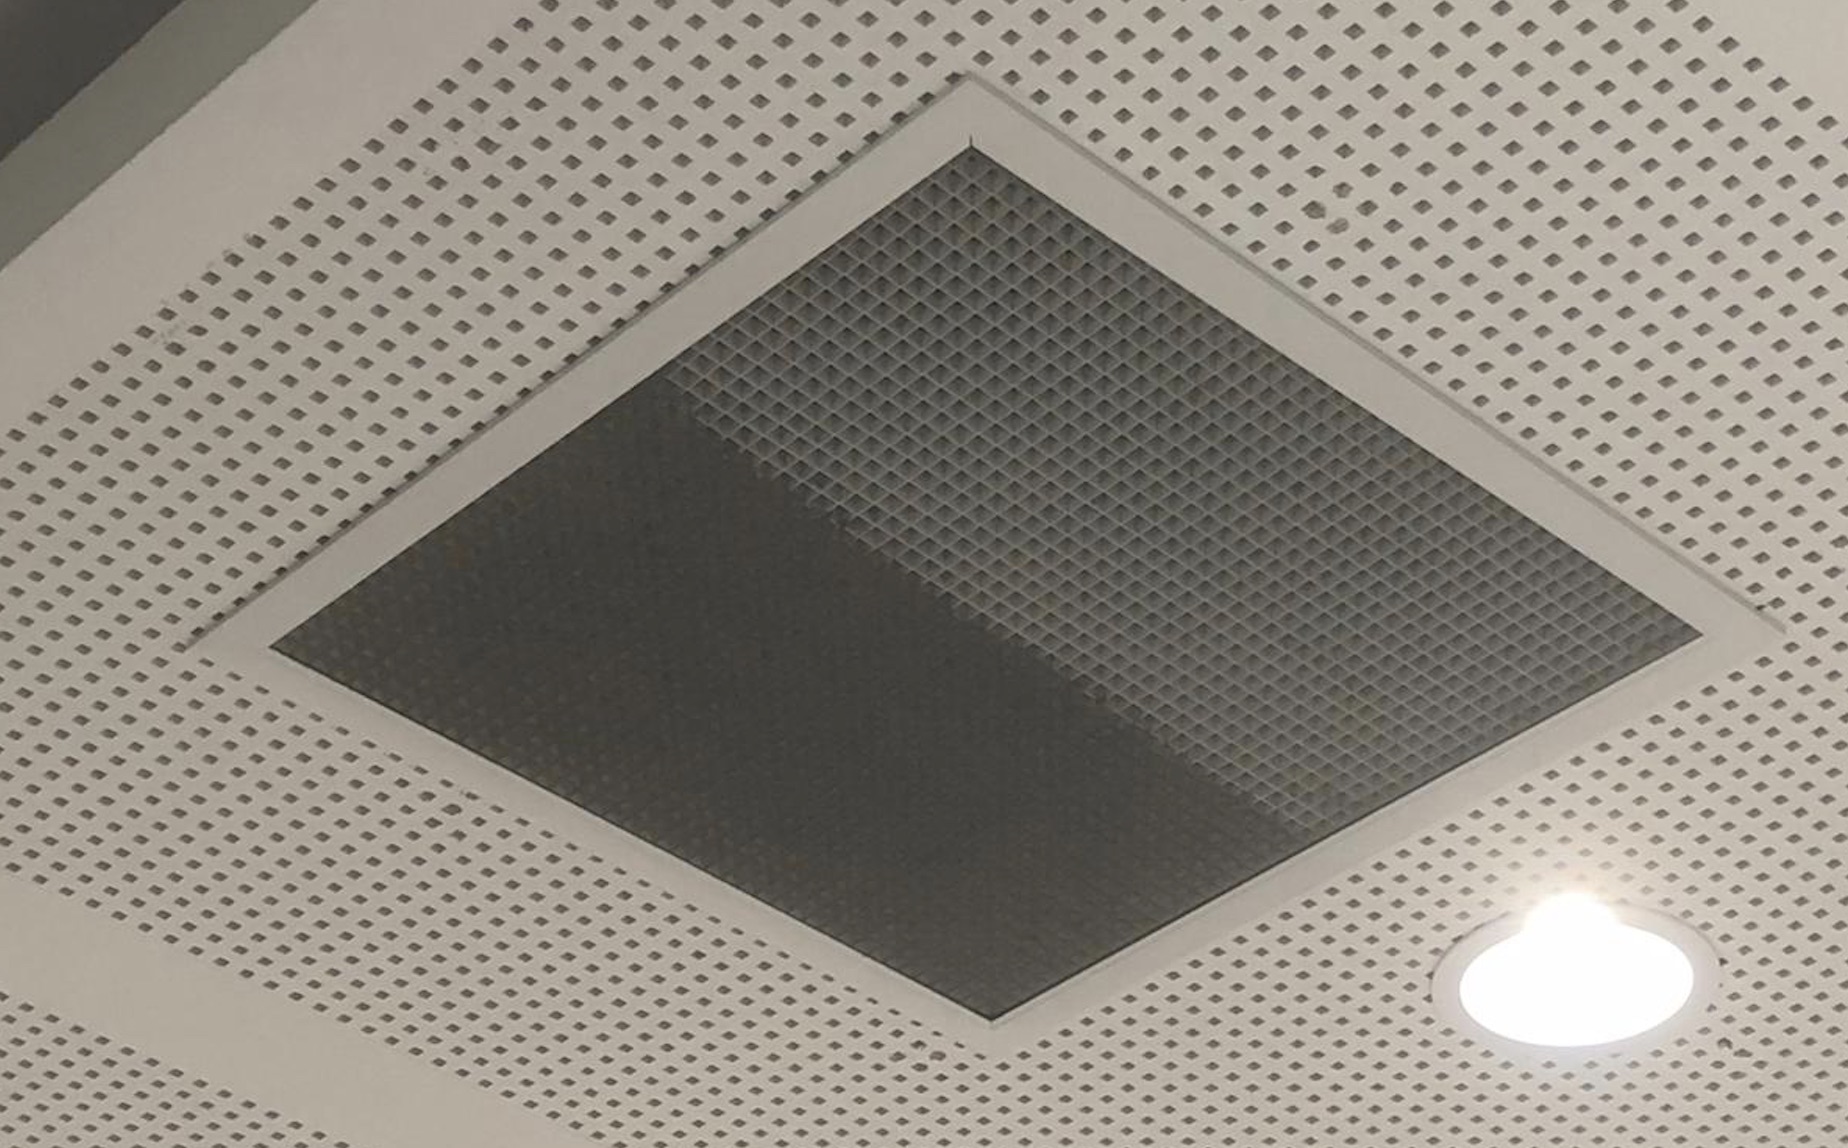 Dust covered vent